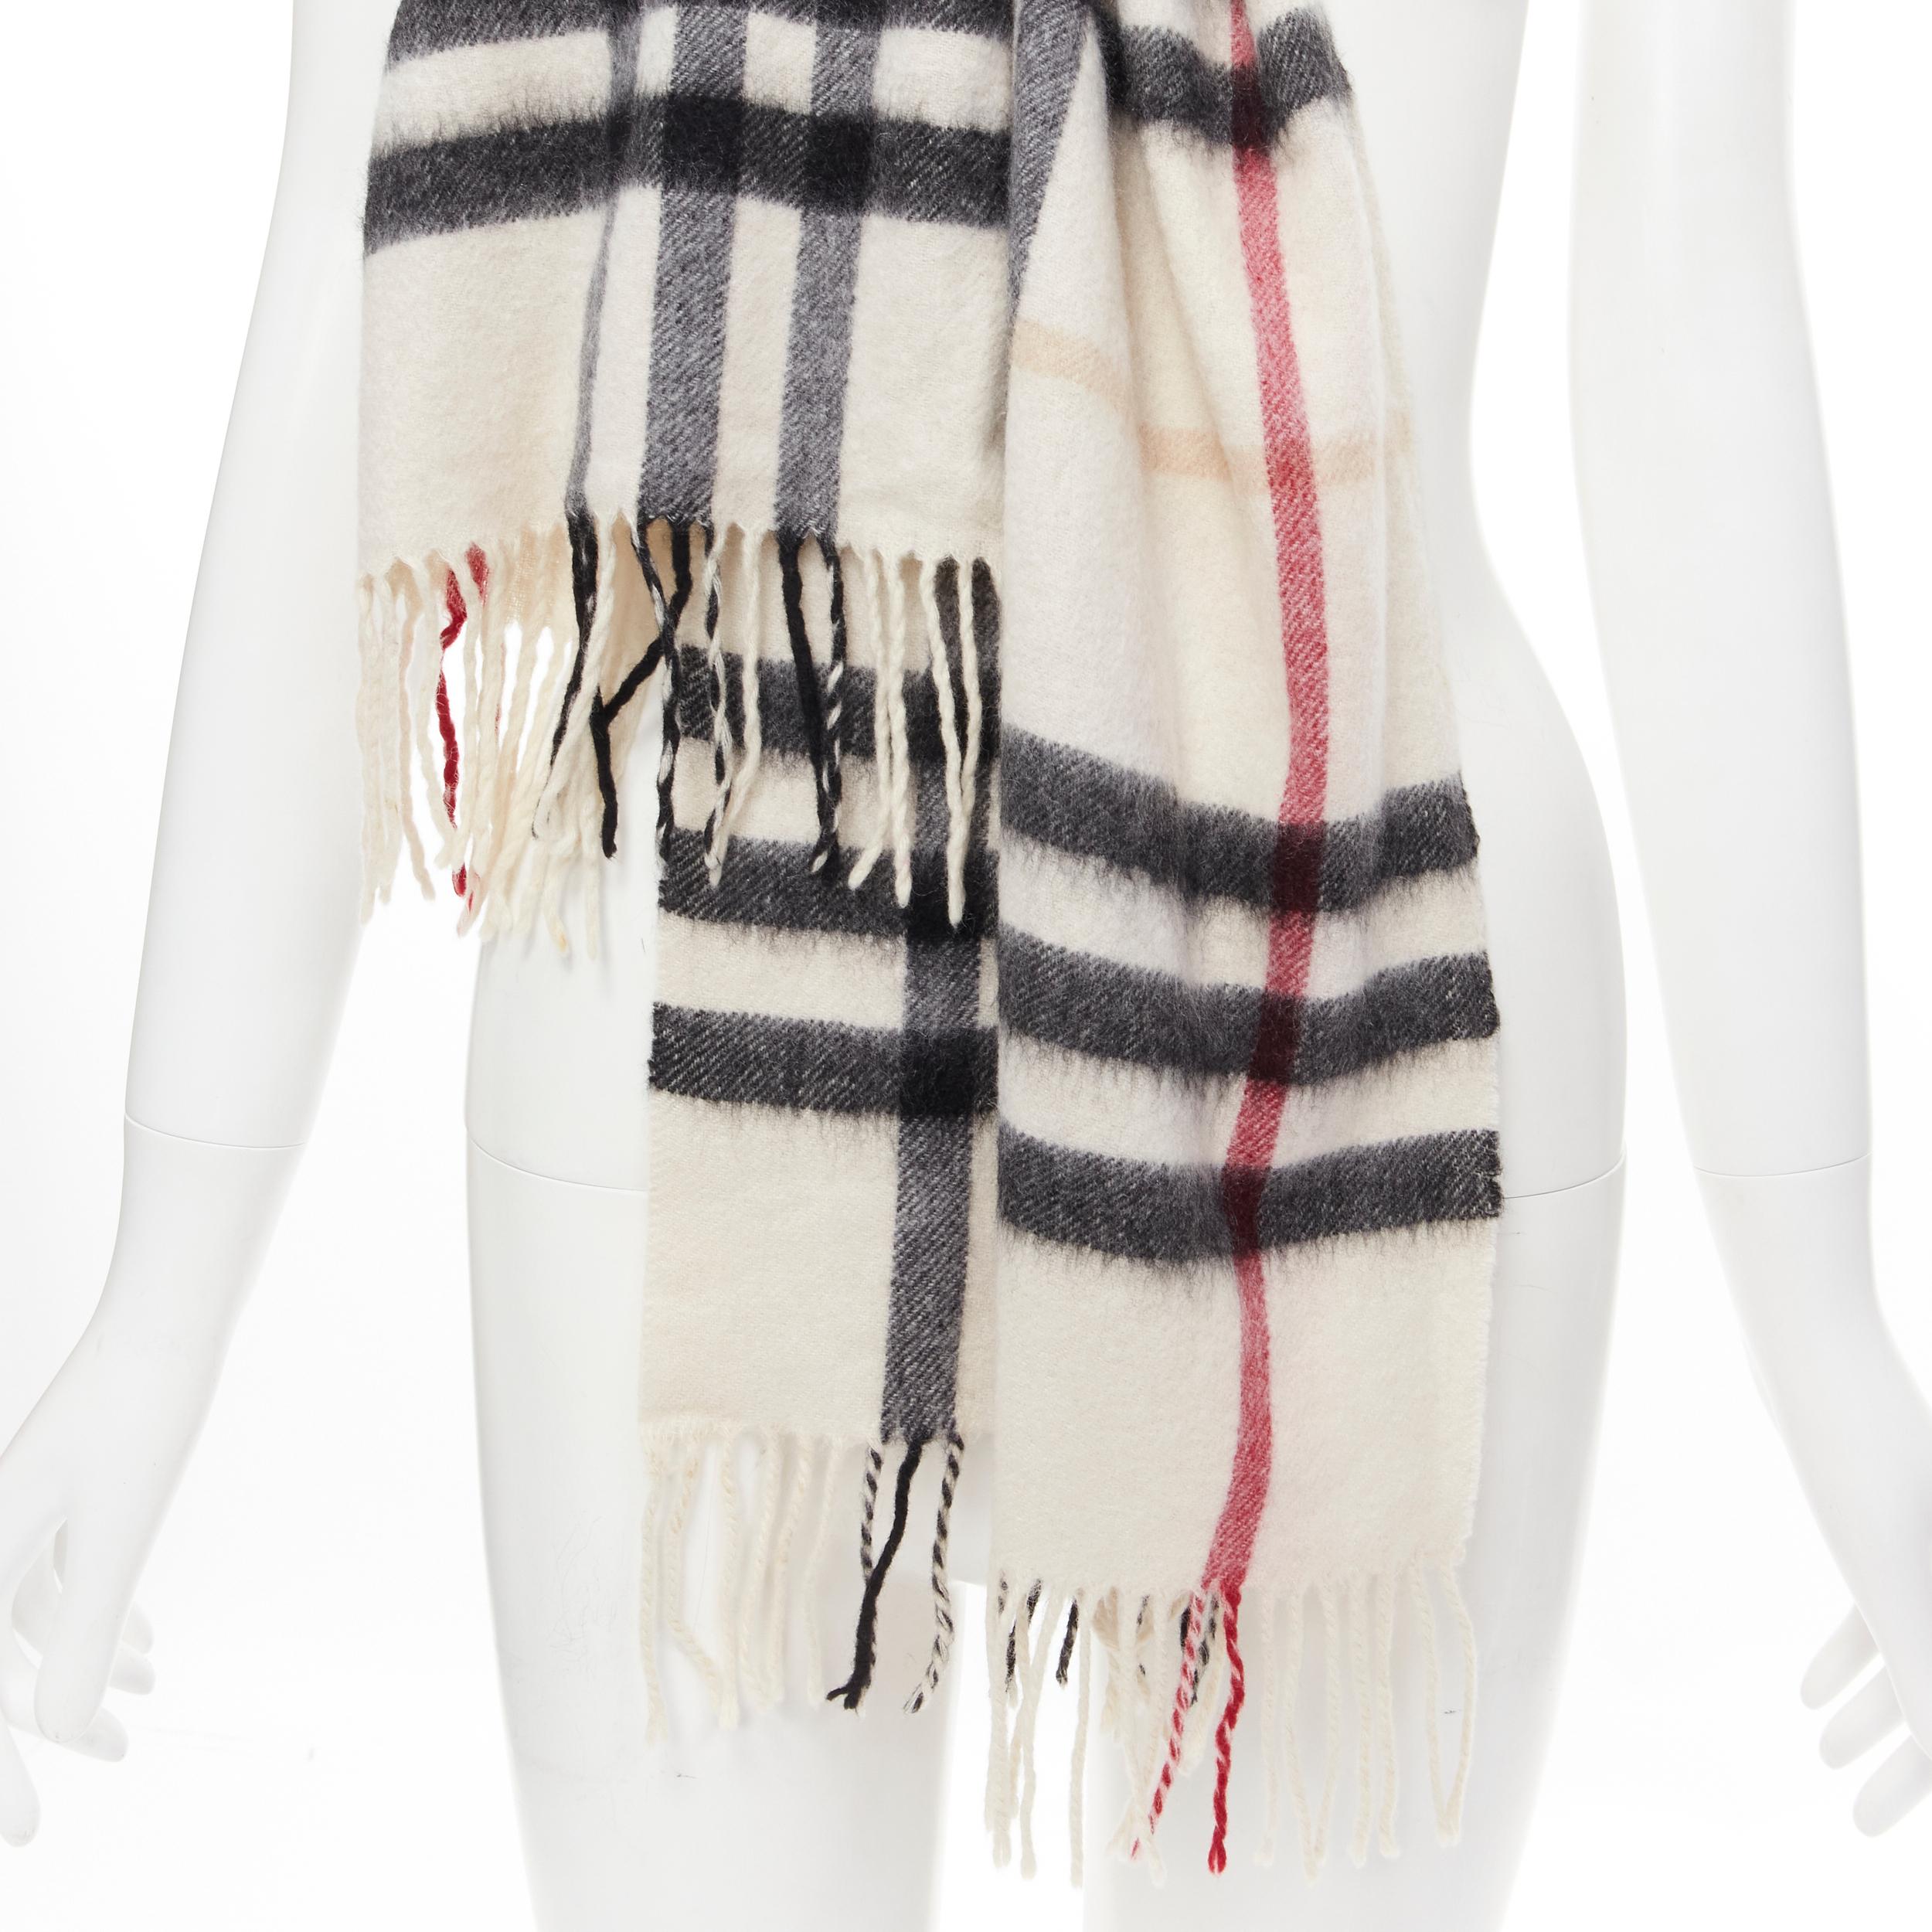 BURBERRY 100% cashmere Classic House Check fringe scarf stone 
Reference: DNCU/A00002
Brand: Burberry 
Material: Cashmere 
Color: Beige 
Pattern: Check 
Made in: Scotland 

CONDITION: 
Condition: Good, this item was pre-owned and is in good